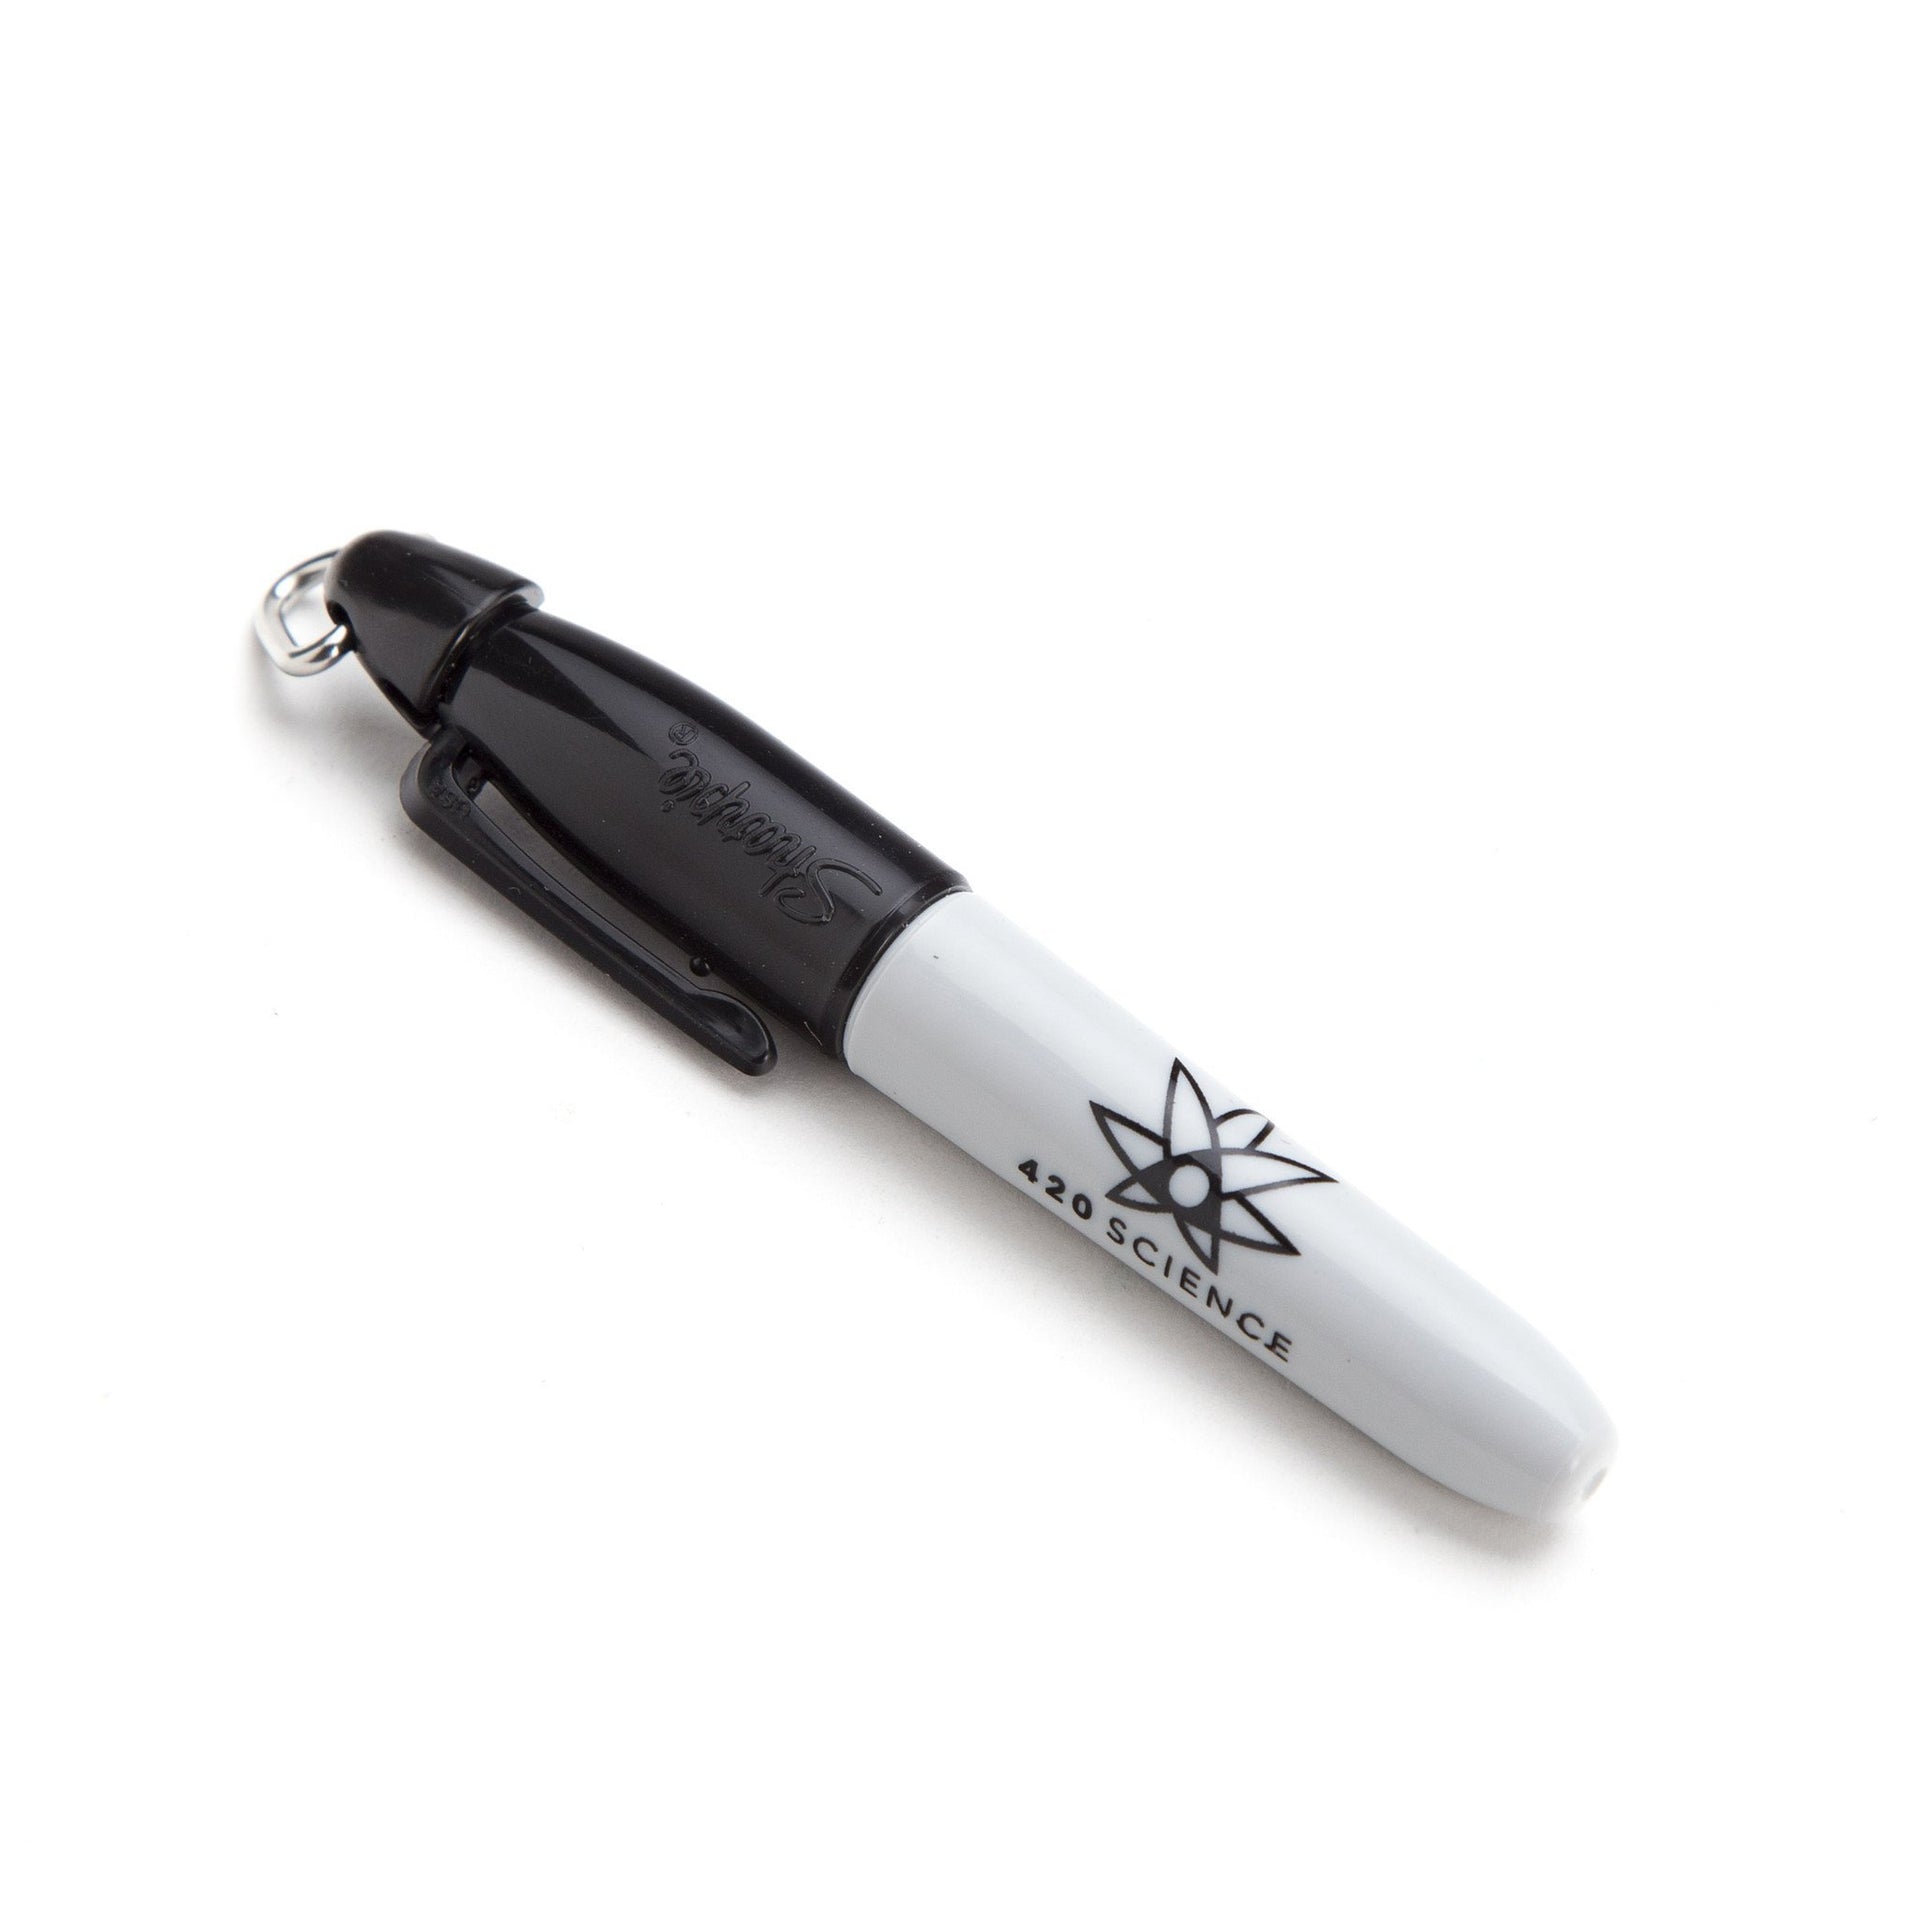 420 Science Sharpie - 420 Science - The most trusted online smoke shop.